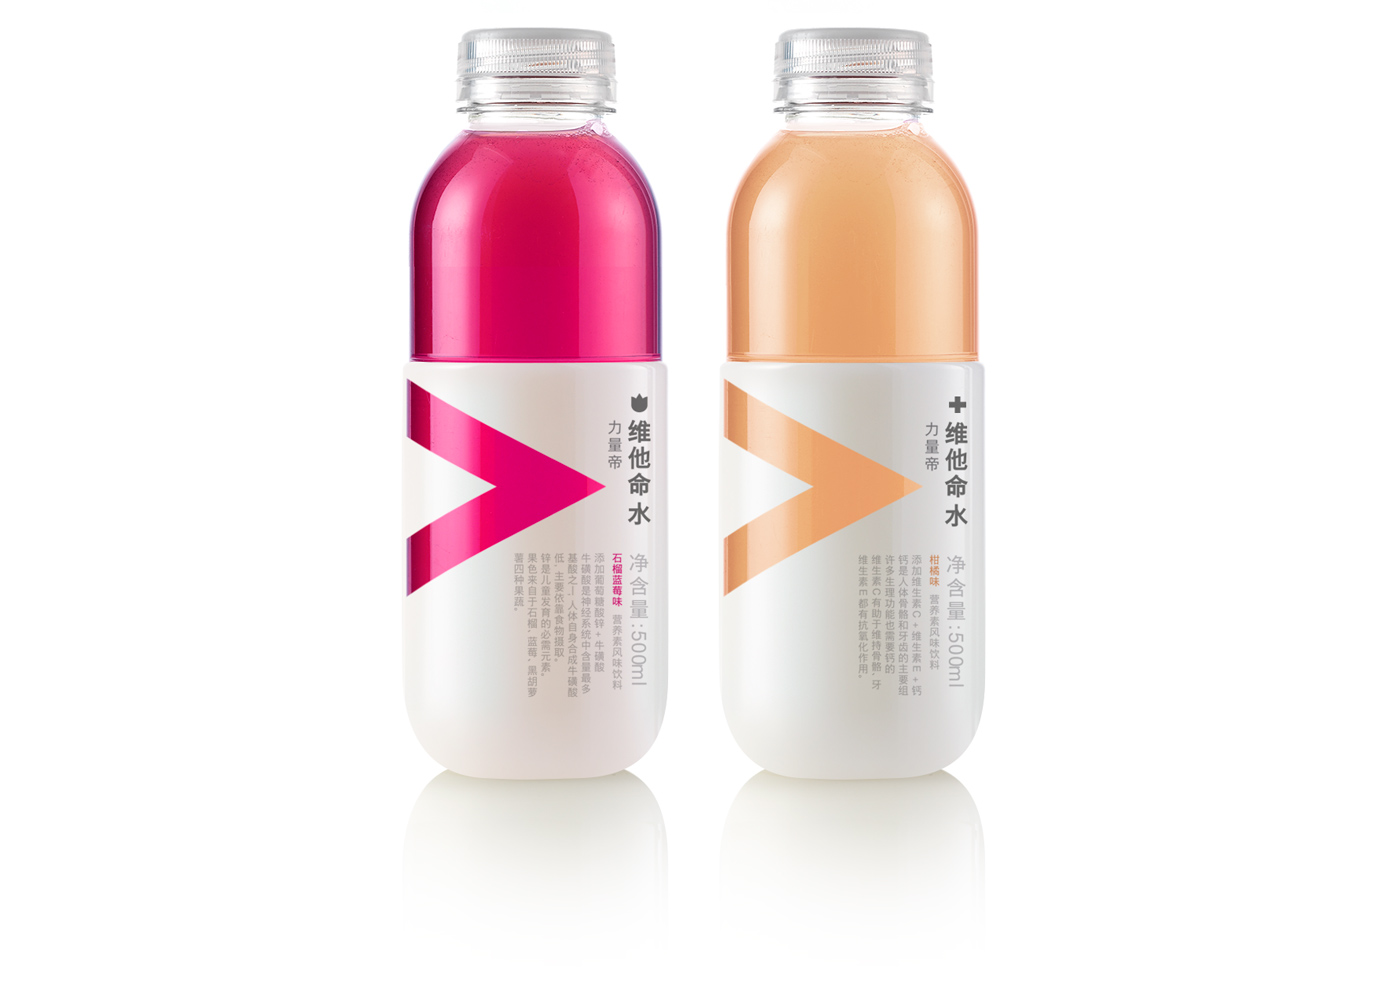 Vitamin-Enriched Water with a Color and Flavor Pop